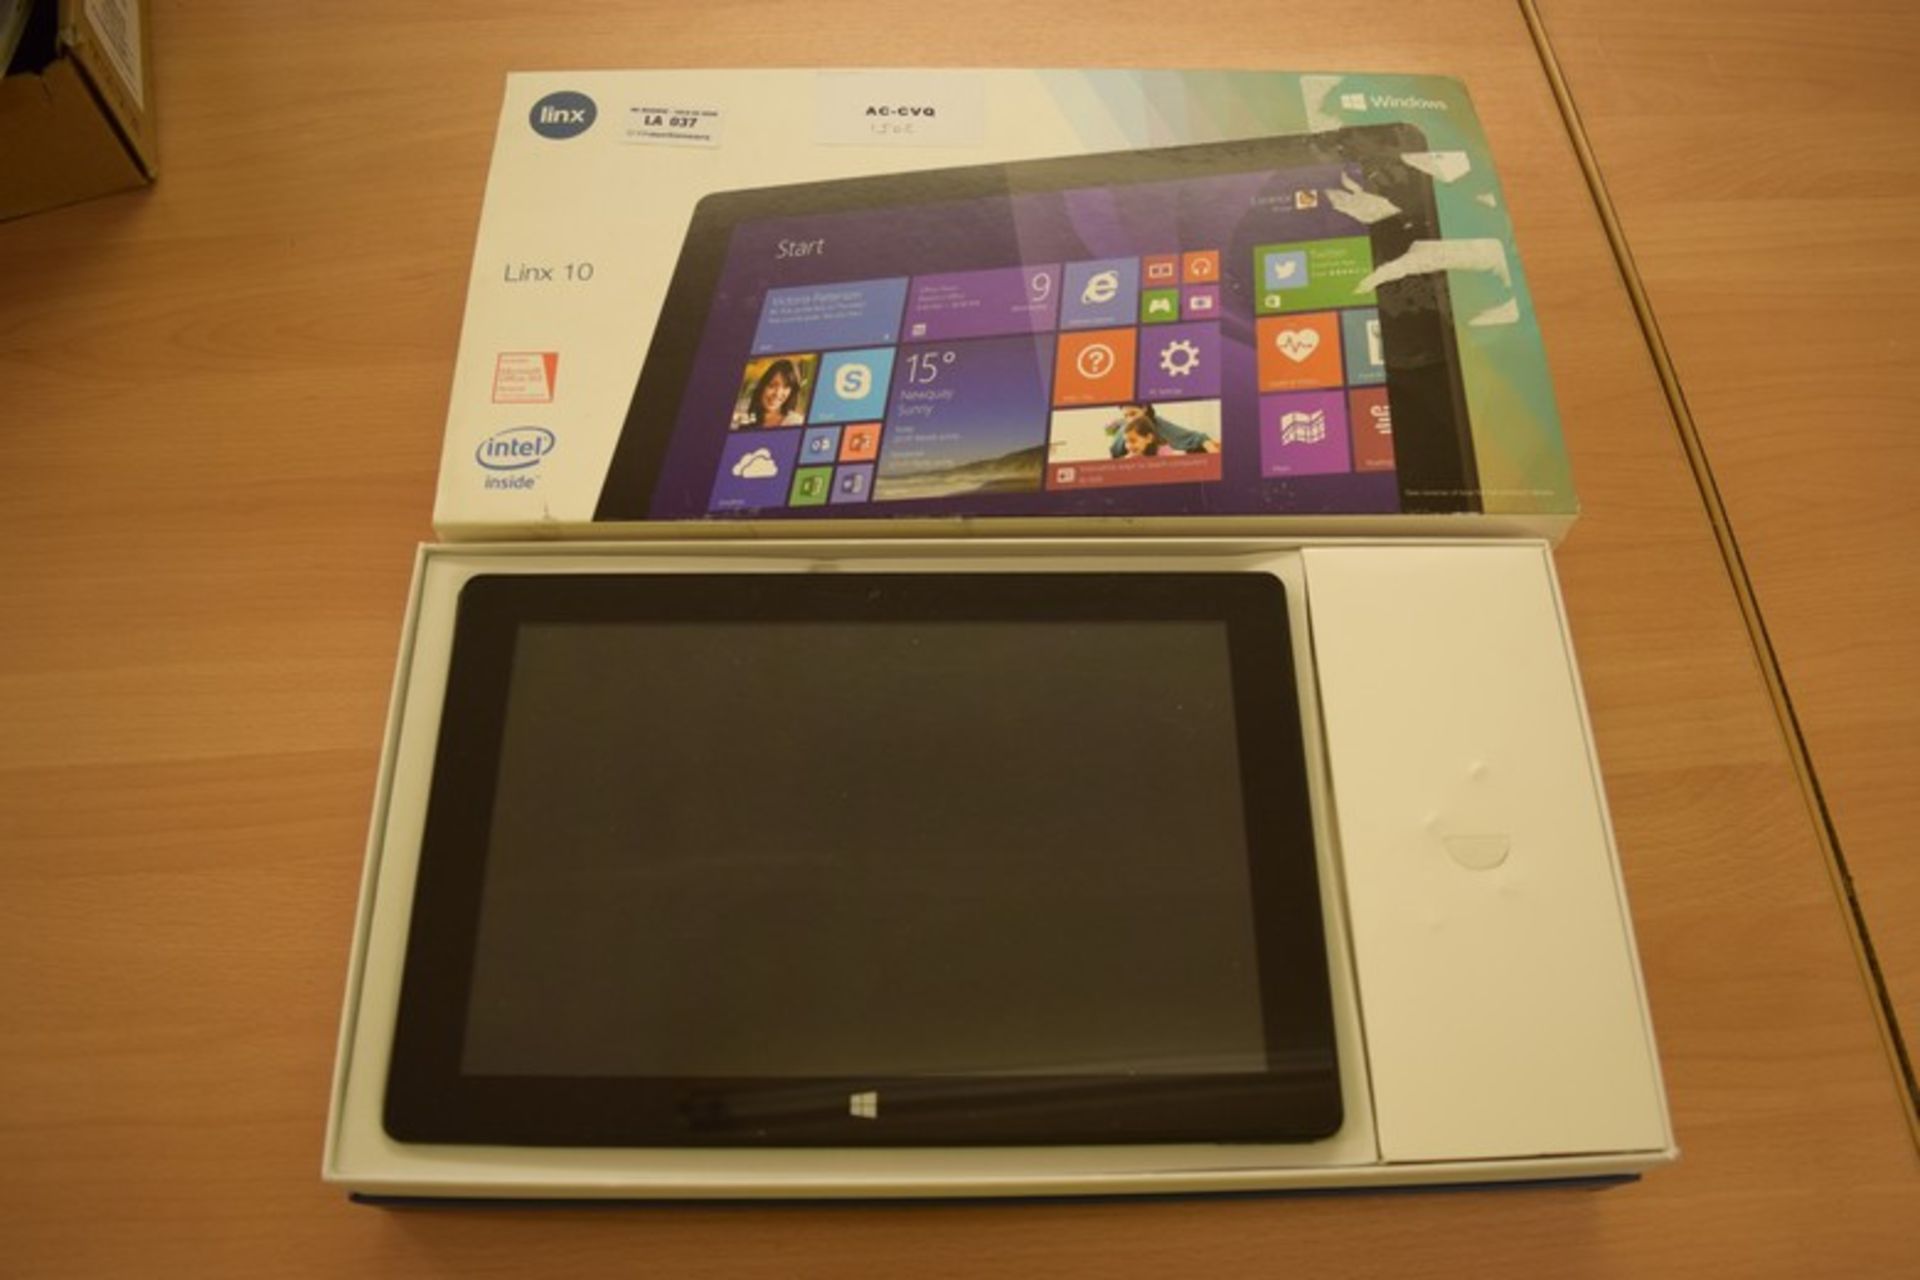 1 x LINX 10 TABLET RRP £140 (PALLET1502)(AC) *PLEASE NOTE THAT THE BID PRICE IS MULTIPLIED BY THE